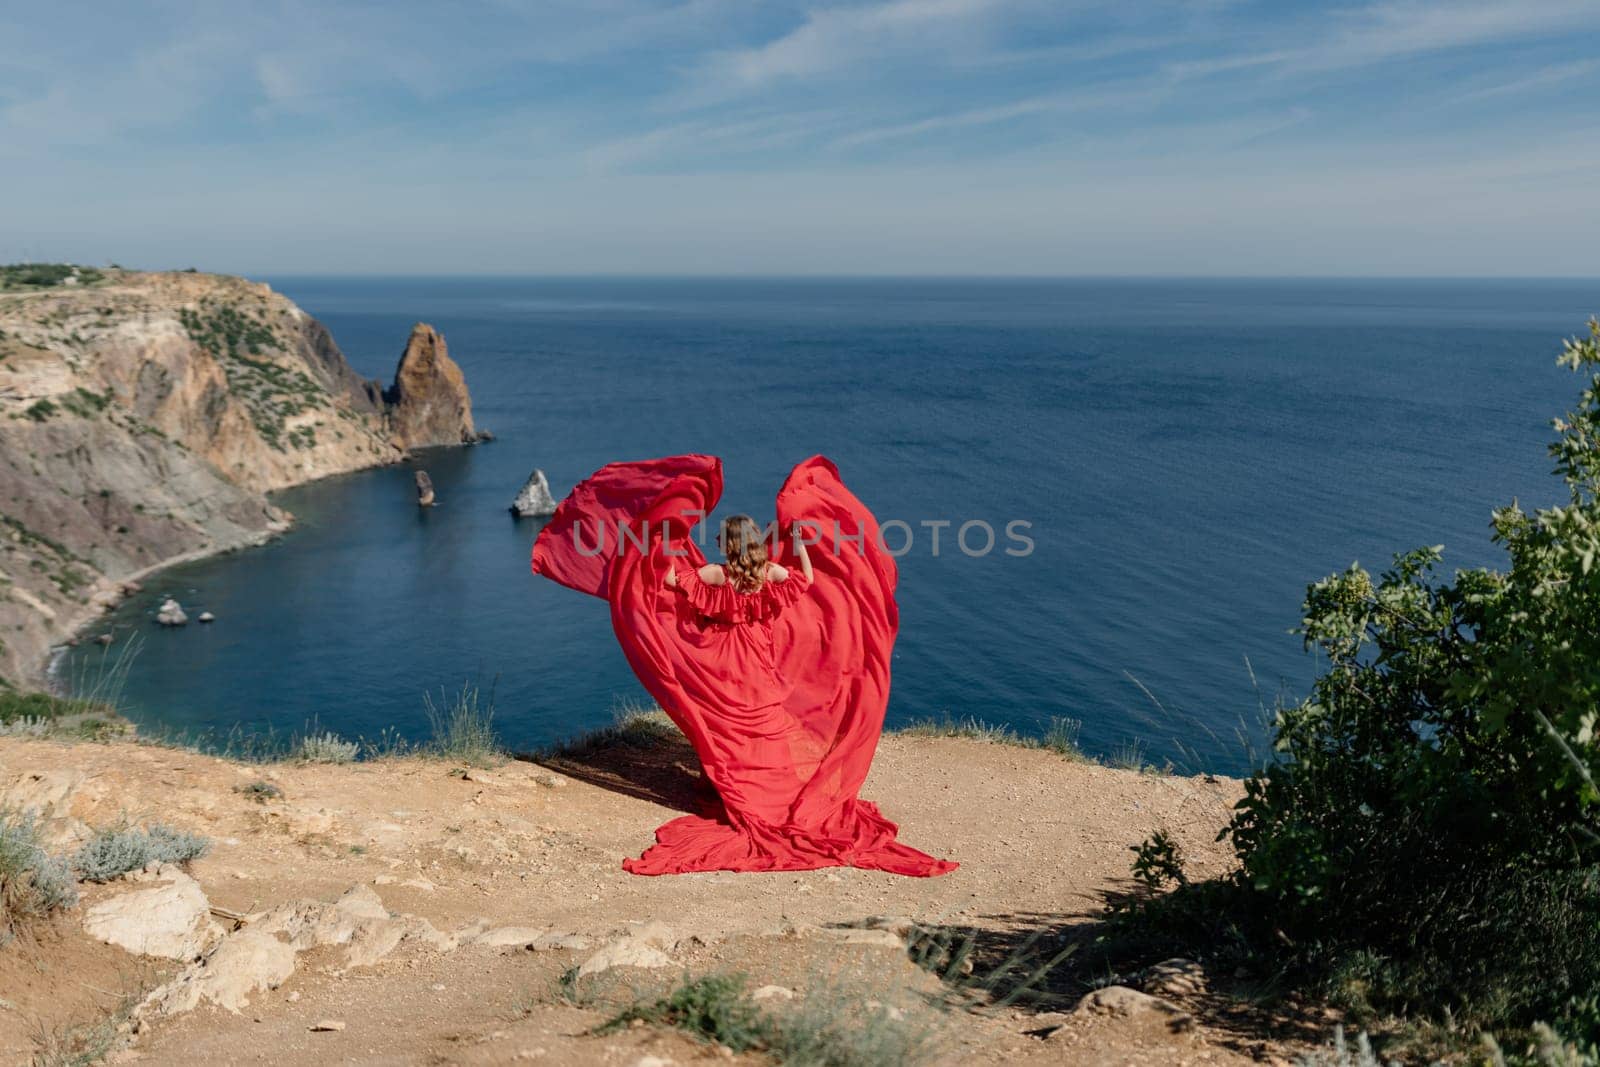 A woman in a red dress is standing on a rocky beach, with the ocean in the background. She is wearing a red dress and her hair is flowing in the wind. The scene is serene and peaceful